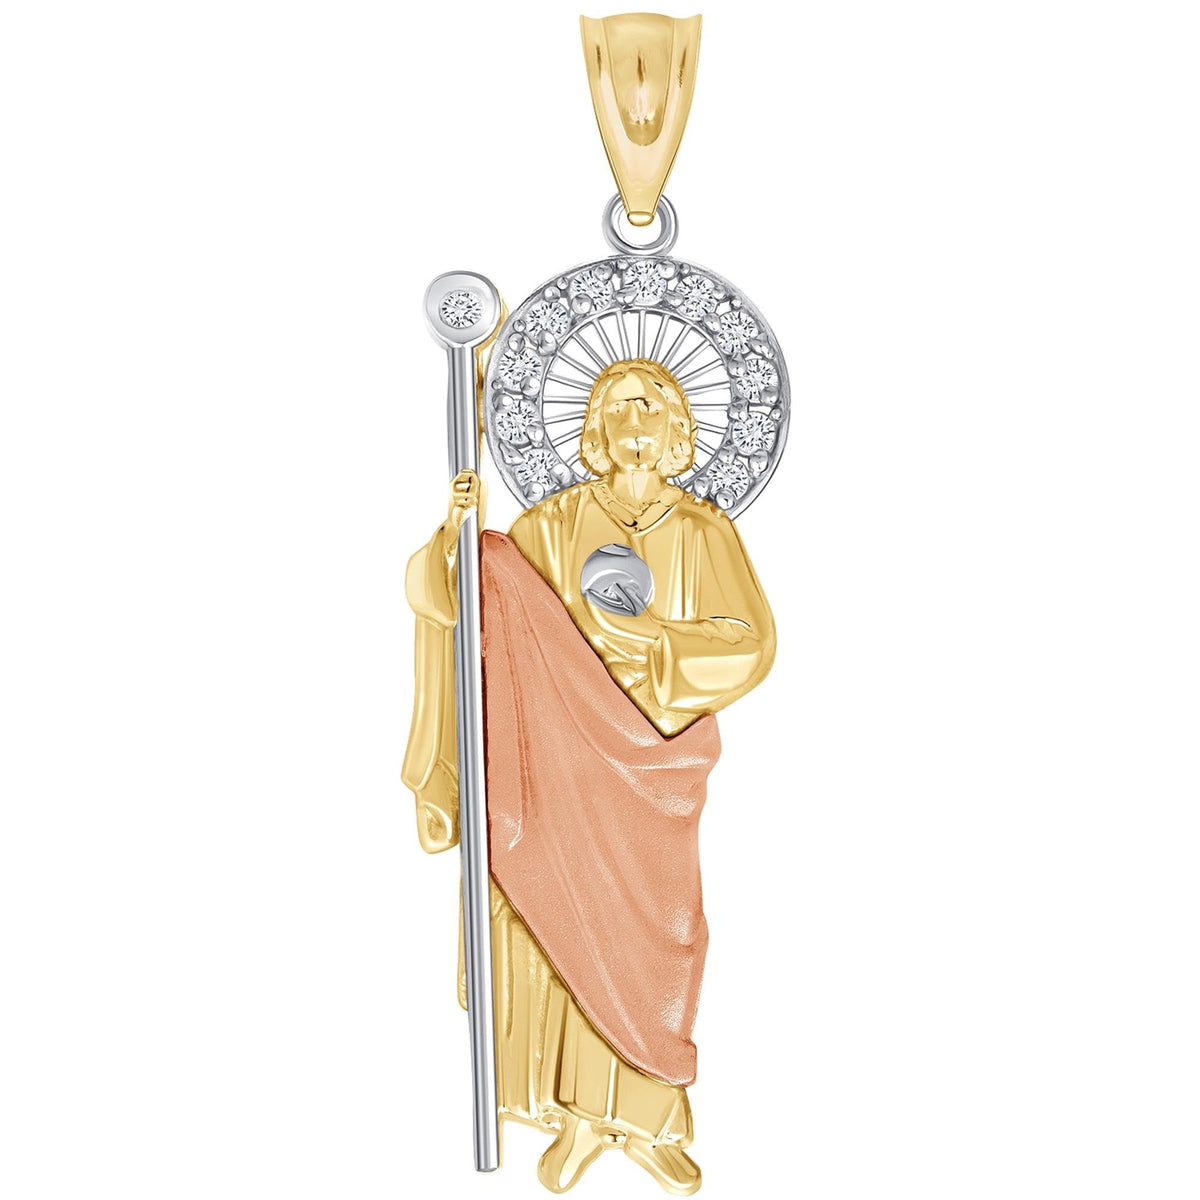 14k Yellow Gold and Rose Gold Saint Jude Pendant with Cubic Zirconia Stones - 3 Sizes